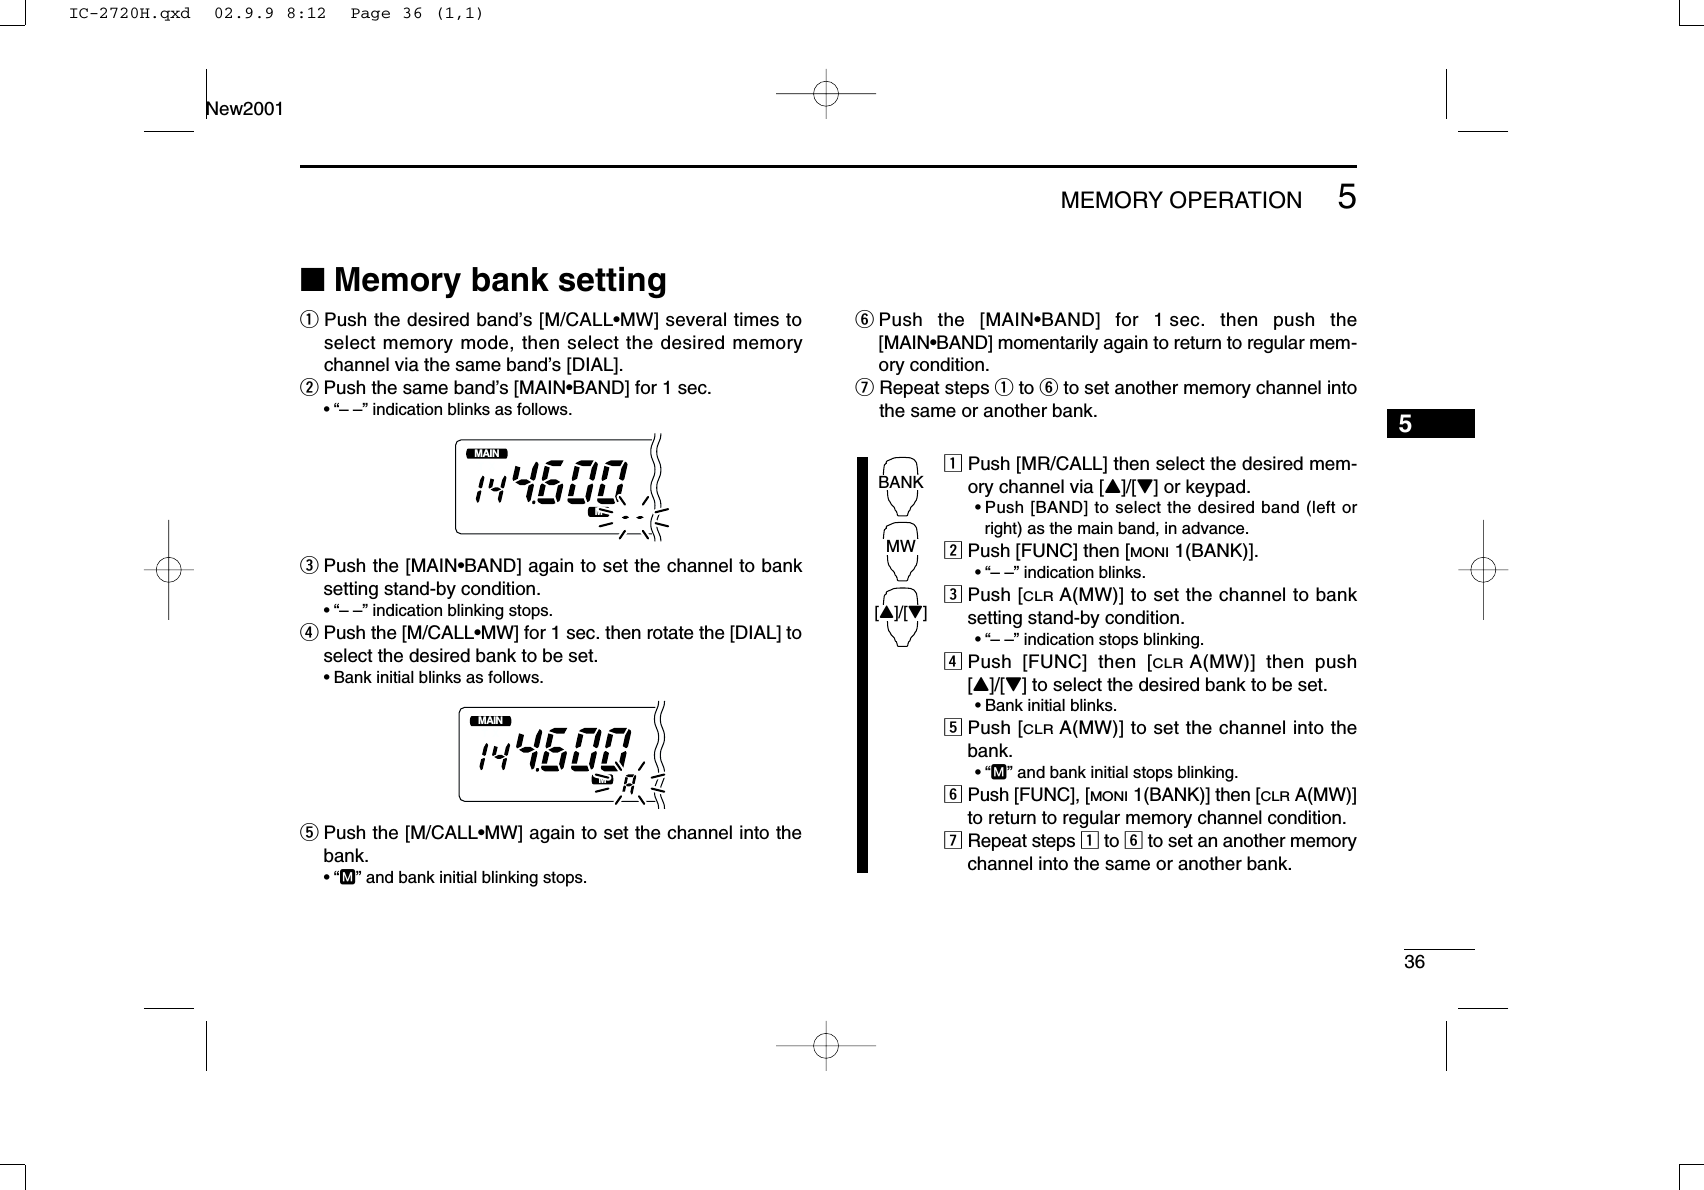 365MEMORY OPERATIONNew20015■Memory bank settingqPush the desired band’s [M/CALL•MW] several times toselect memory mode, then select the desired memorychannel via the same band’s [DIAL].wPush the same band’s [MAIN•BAND] for 1 sec. •“– –” indication blinks as follows.ePush the [MAIN•BAND] again to set the channel to banksetting stand-by condition.•“– –” indication blinking stops.rPush the [M/CALL•MW] for 1 sec. then rotate the [DIAL] toselect the desired bank to be set.•Bank initial blinks as follows.tPush the [M/CALL•MW] again to set the channel into thebank.•“M” and bank initial blinking stops.yPush the [MAIN•BAND] for 1 sec. then push the[MAIN•BAND] momentarily again to return to regular mem-ory condition.uRepeat steps qto yto set another memory channel intothe same or another bank.zPush [MR/CALL] then select the desired mem-ory channel via [Y]/[Z] or keypad.•Push [BAND] to select the desired band (left orright) as the main band, in advance.xPush [FUNC] then [MONI1(BANK)].•“– –” indication blinks.cPush [CLRA(MW)] to set the channel to banksetting stand-by condition.•“– –” indication stops blinking.vPush [FUNC] then [CLRA(MW)] then push[Y]/[Z] to select the desired bank to be set.•Bank initial blinks.bPush [CLRA(MW)] to set the channel into thebank.•“M” and bank initial stops blinking.nPush [FUNC], [MONI1(BANK)] then [CLRA(MW)]to return to regular memory channel condition.mRepeat steps zto nto set an another memorychannel into the same or another bank.BANK[Y]/[Z]MWMAINT  XMMAINT  XMIC-2720H.qxd  02.9.9 8:12  Page 36 (1,1)